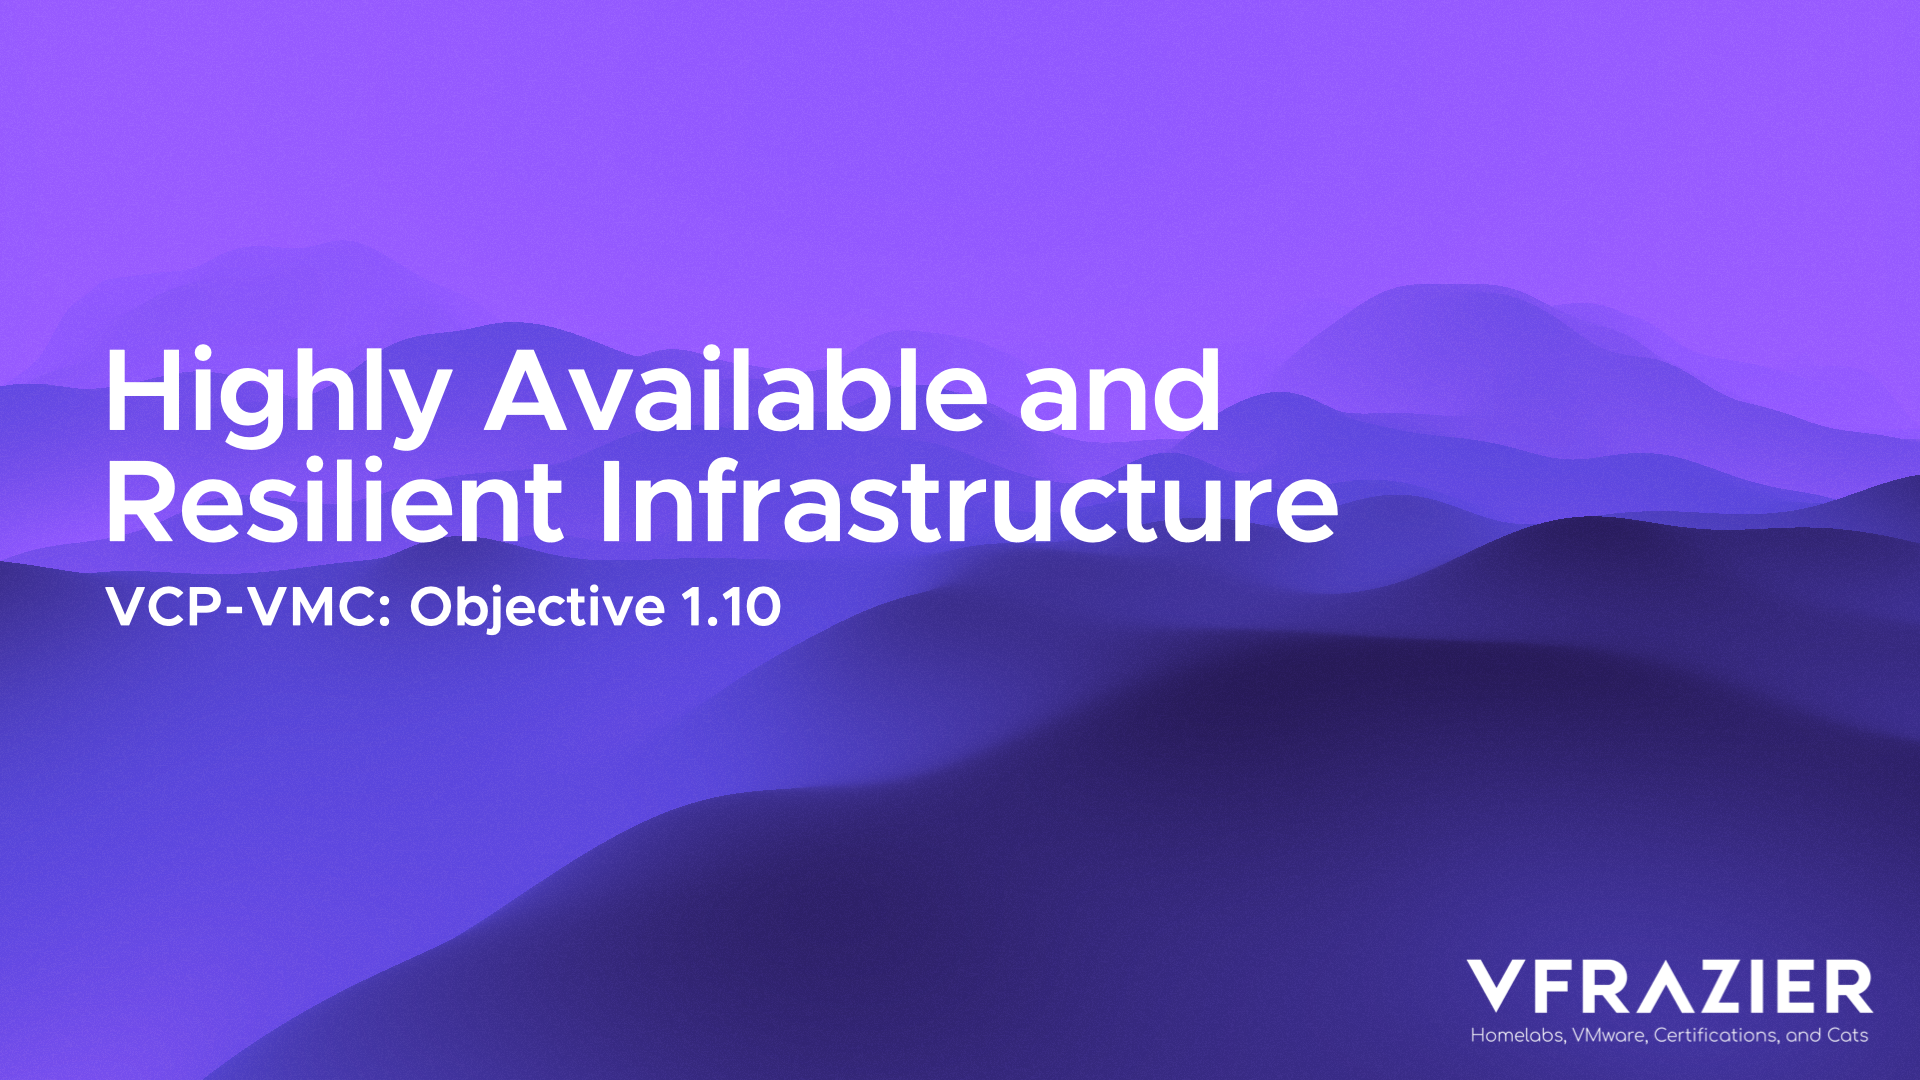 VCP-VMC 1.10: Highly Available and Resilient Infrastructure